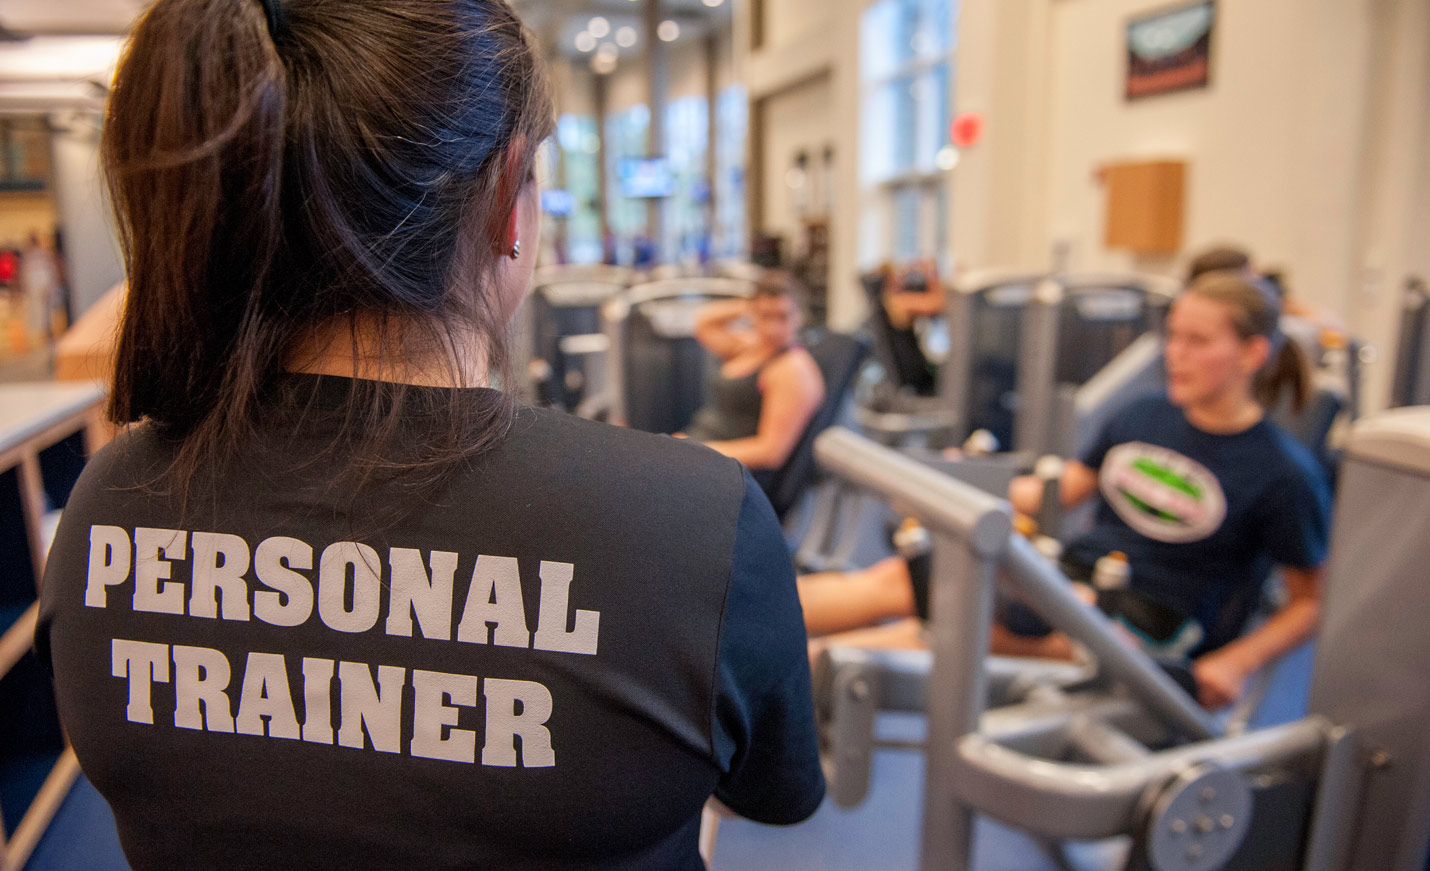 A woman stands with her back to the camera, her shirt reads personal trainer. She is overseeing students exercising.